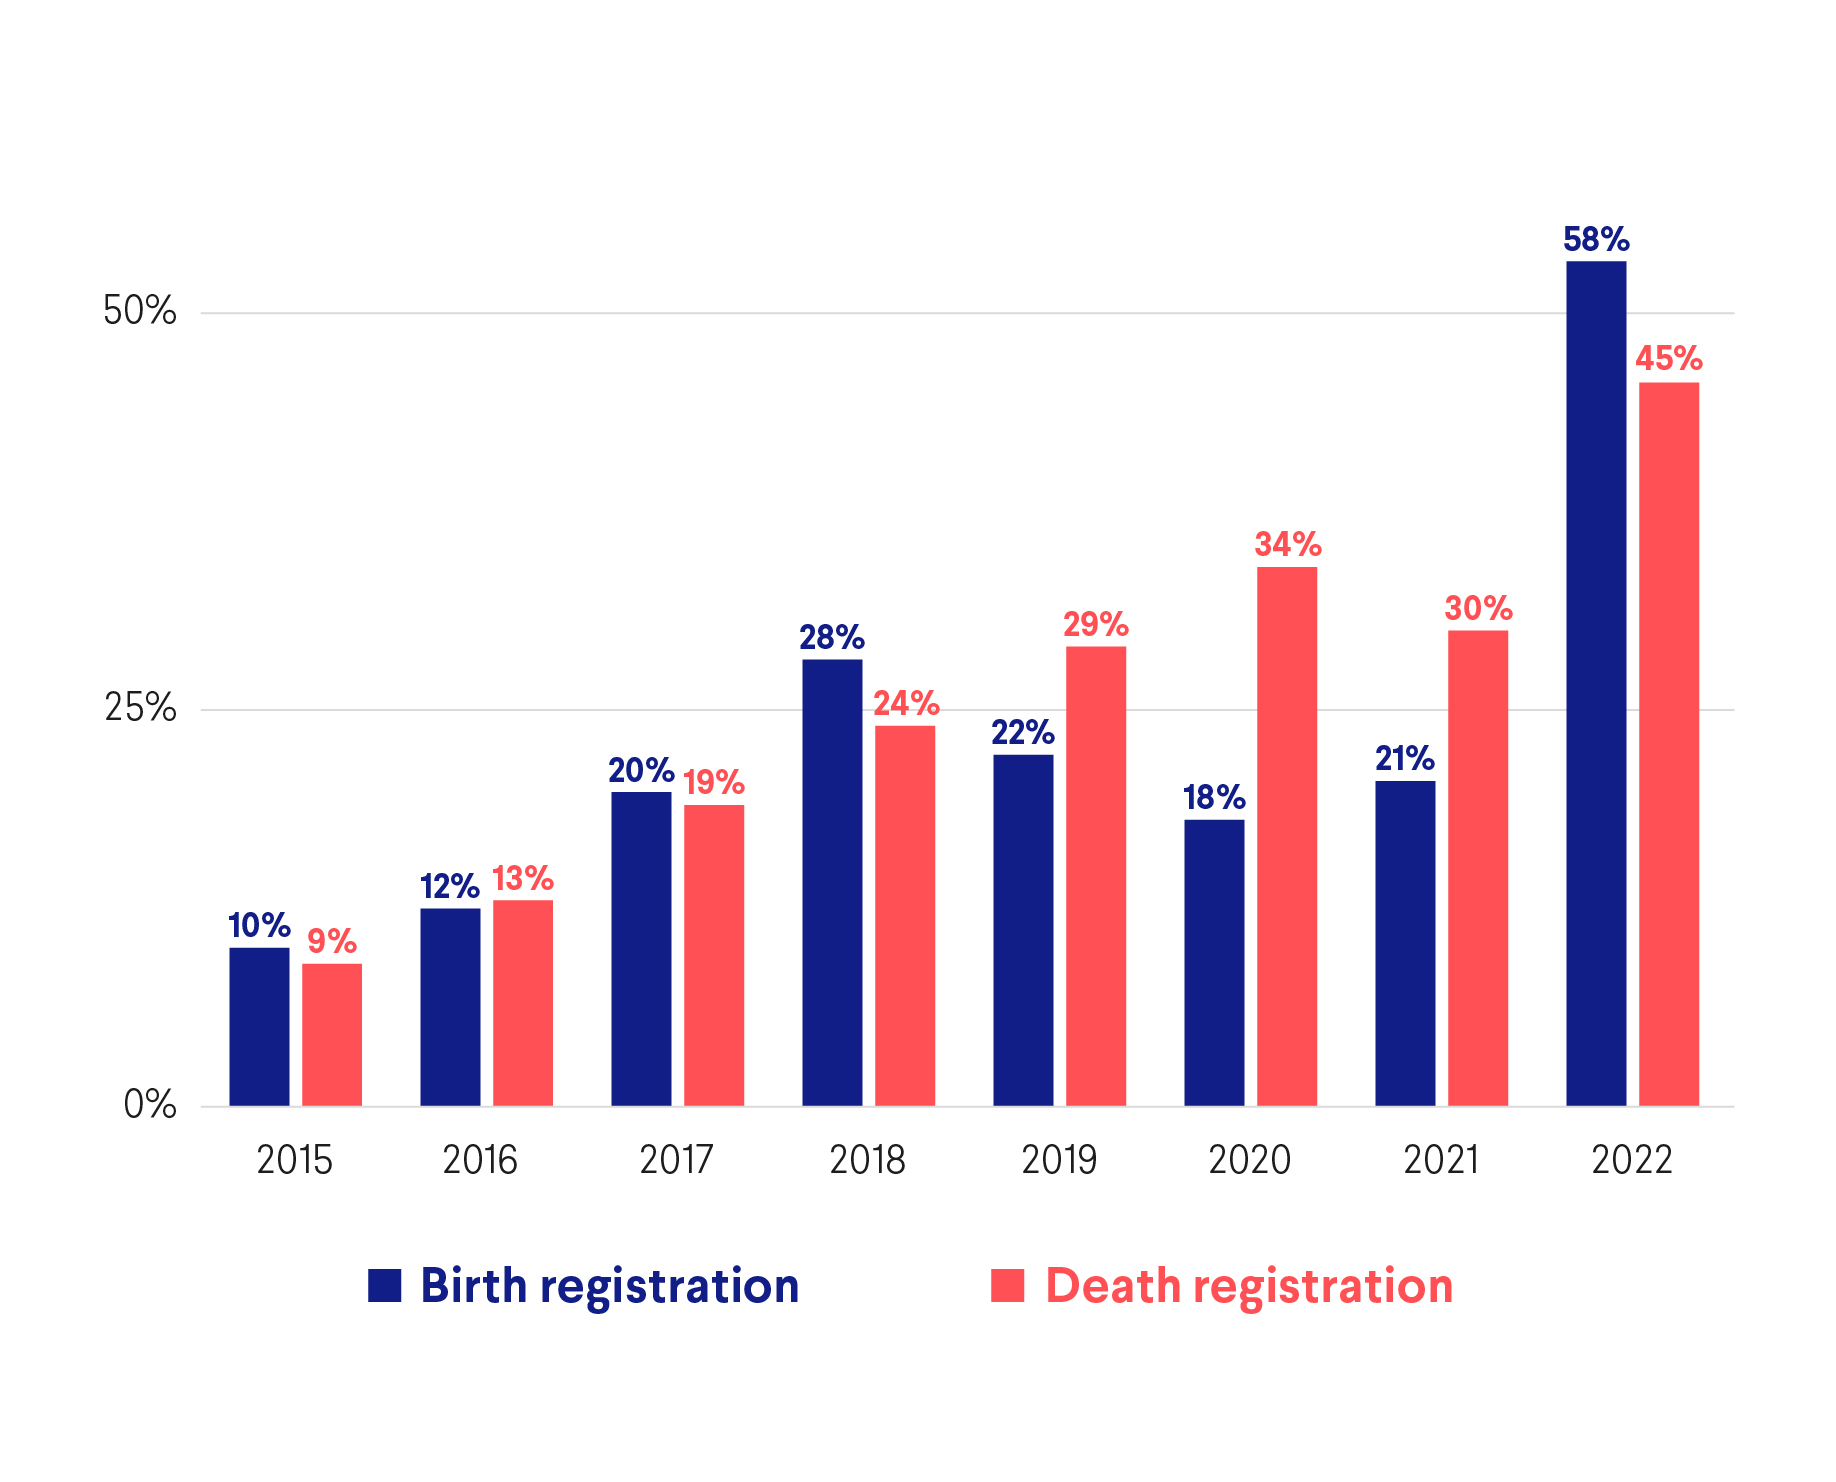 Birth and death registration increased rapidly in the six years